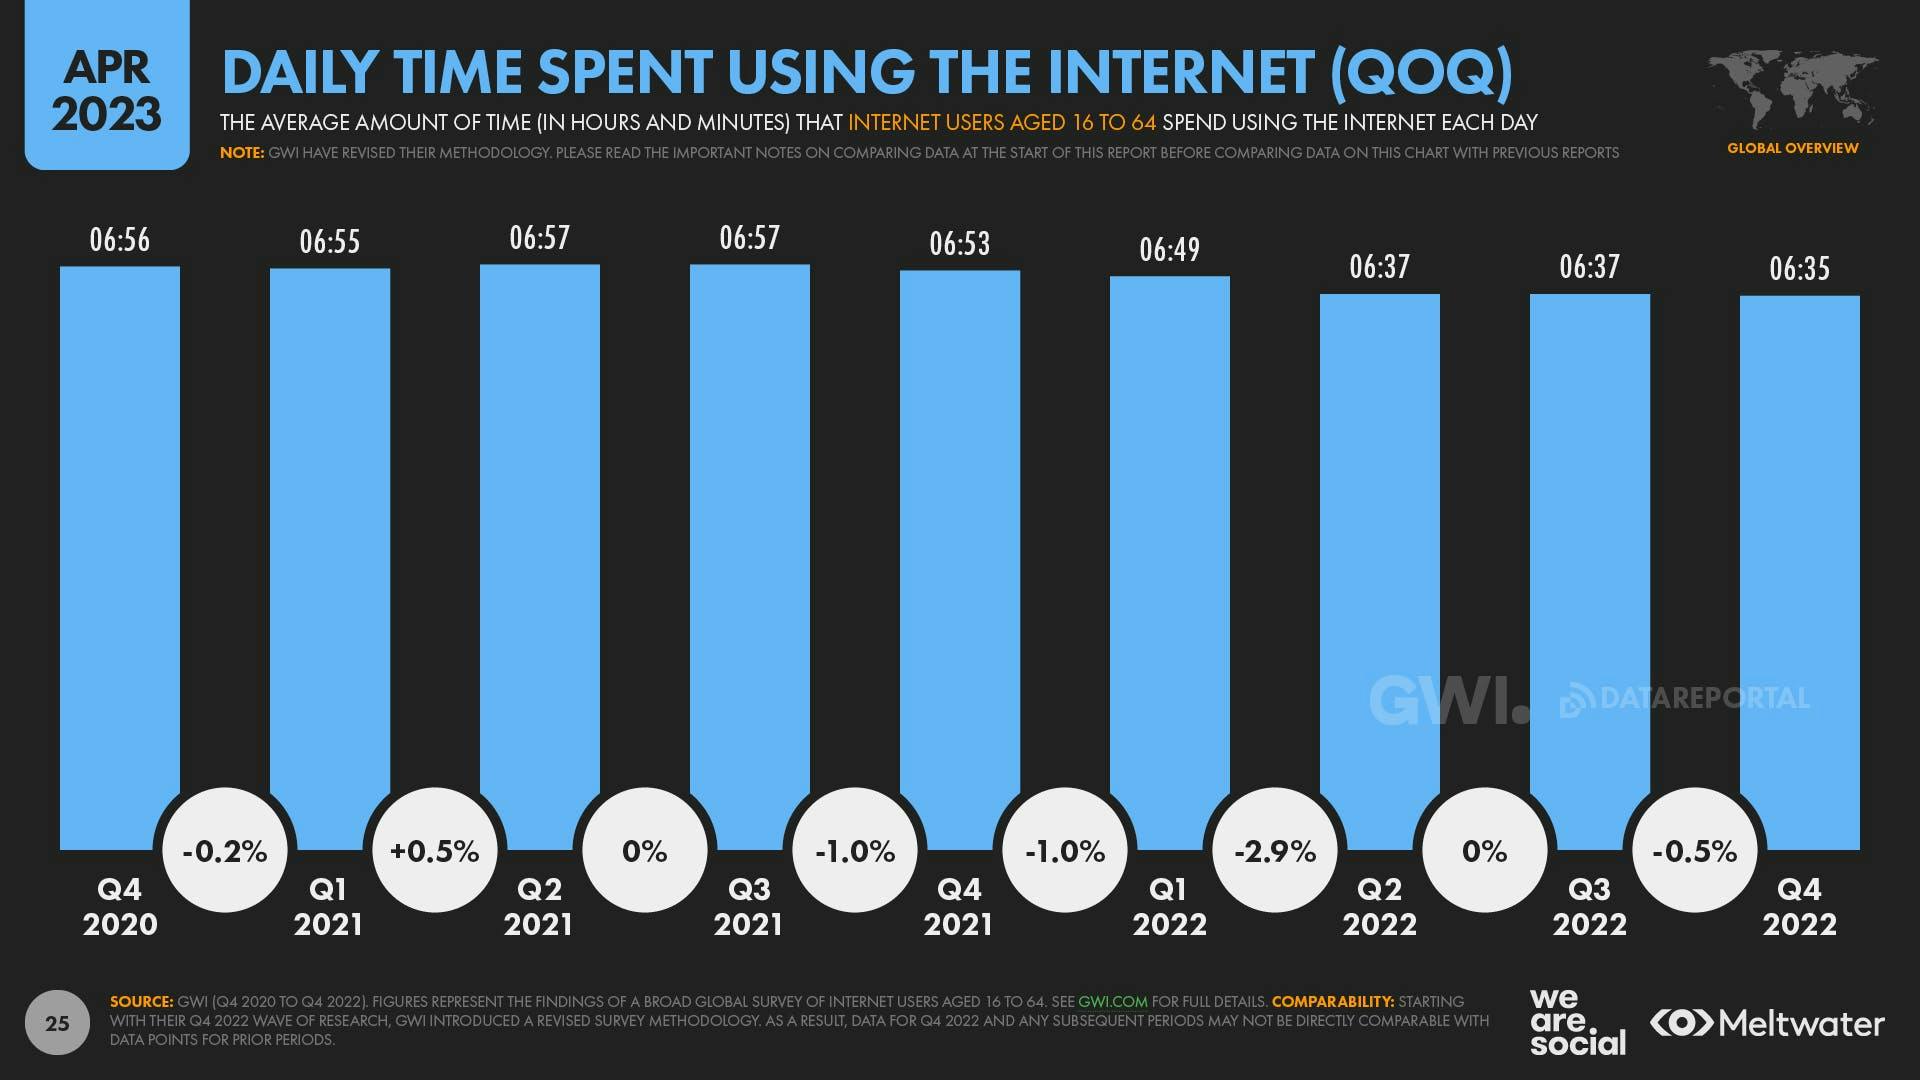 April 2023 Global State of Digital Report: Daily Time Spent Using the Internet QoQ